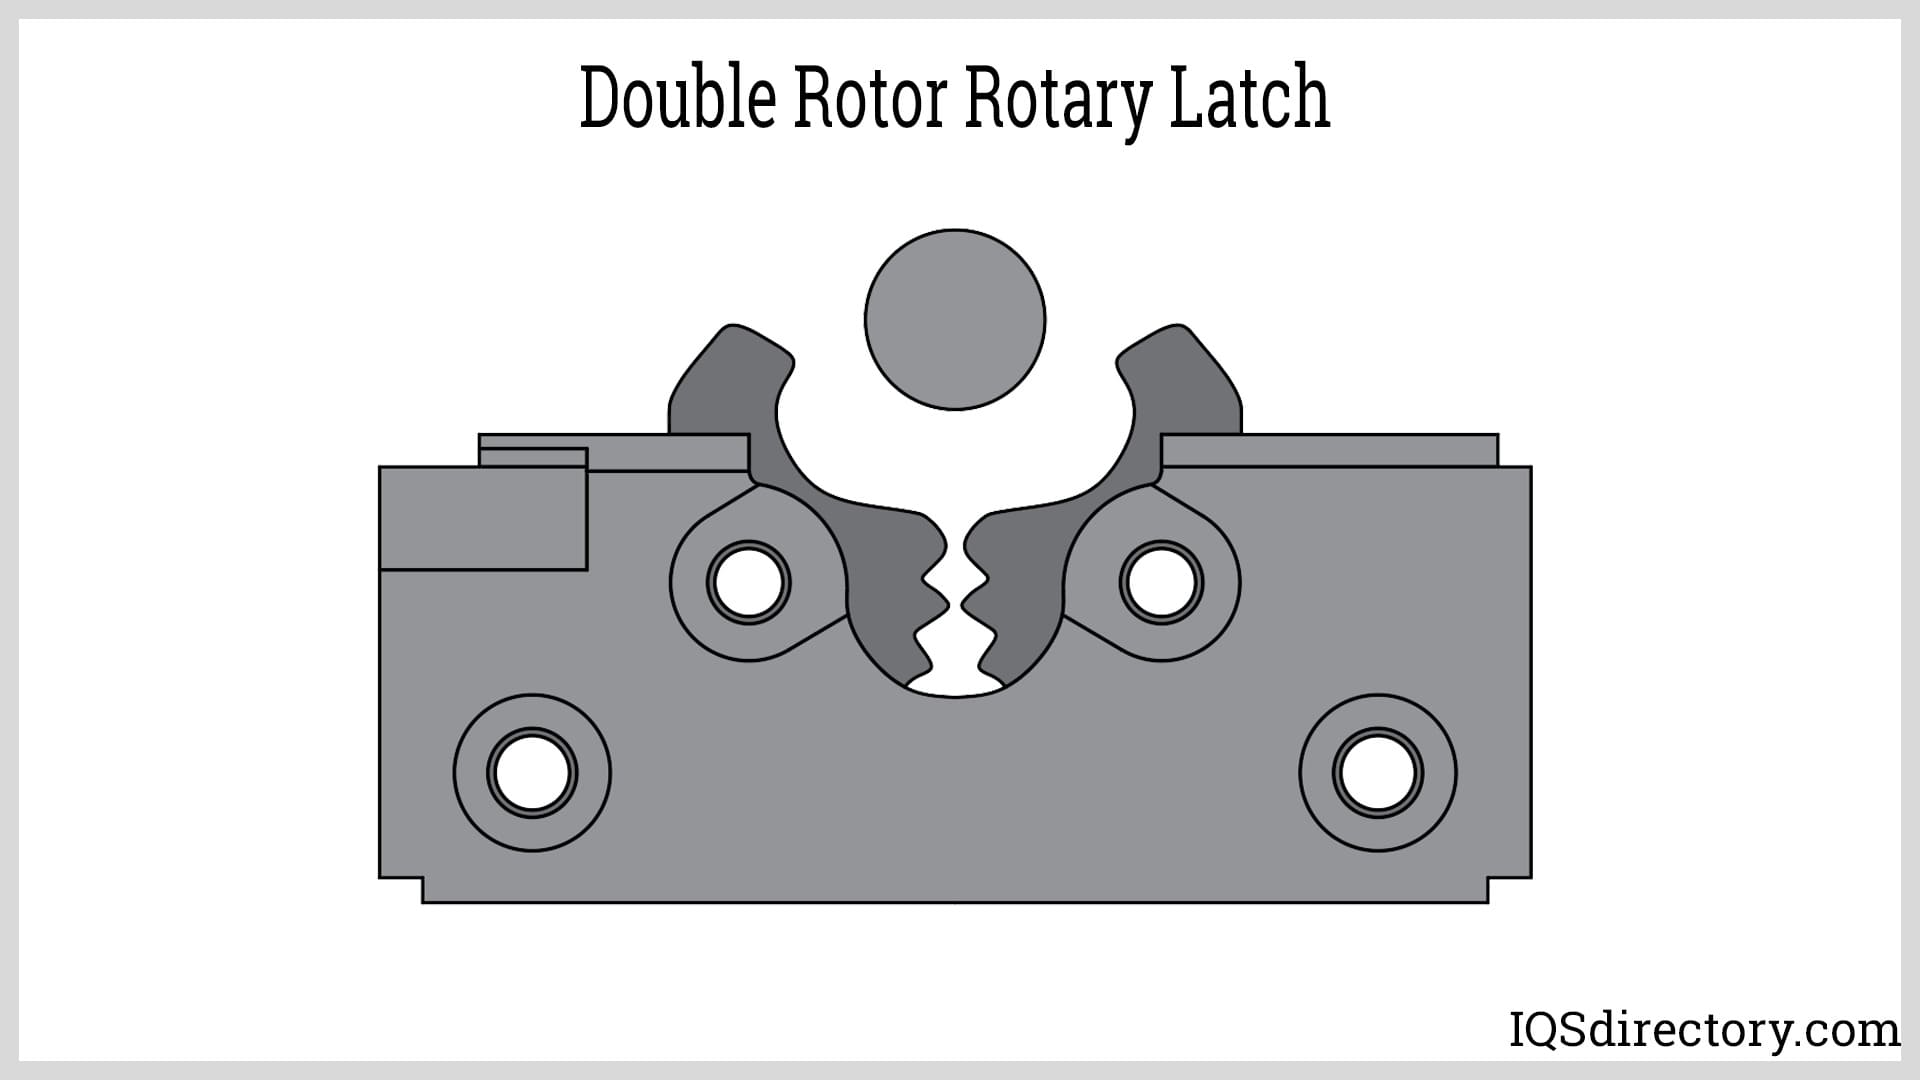 Double Rotor Rotary Latch